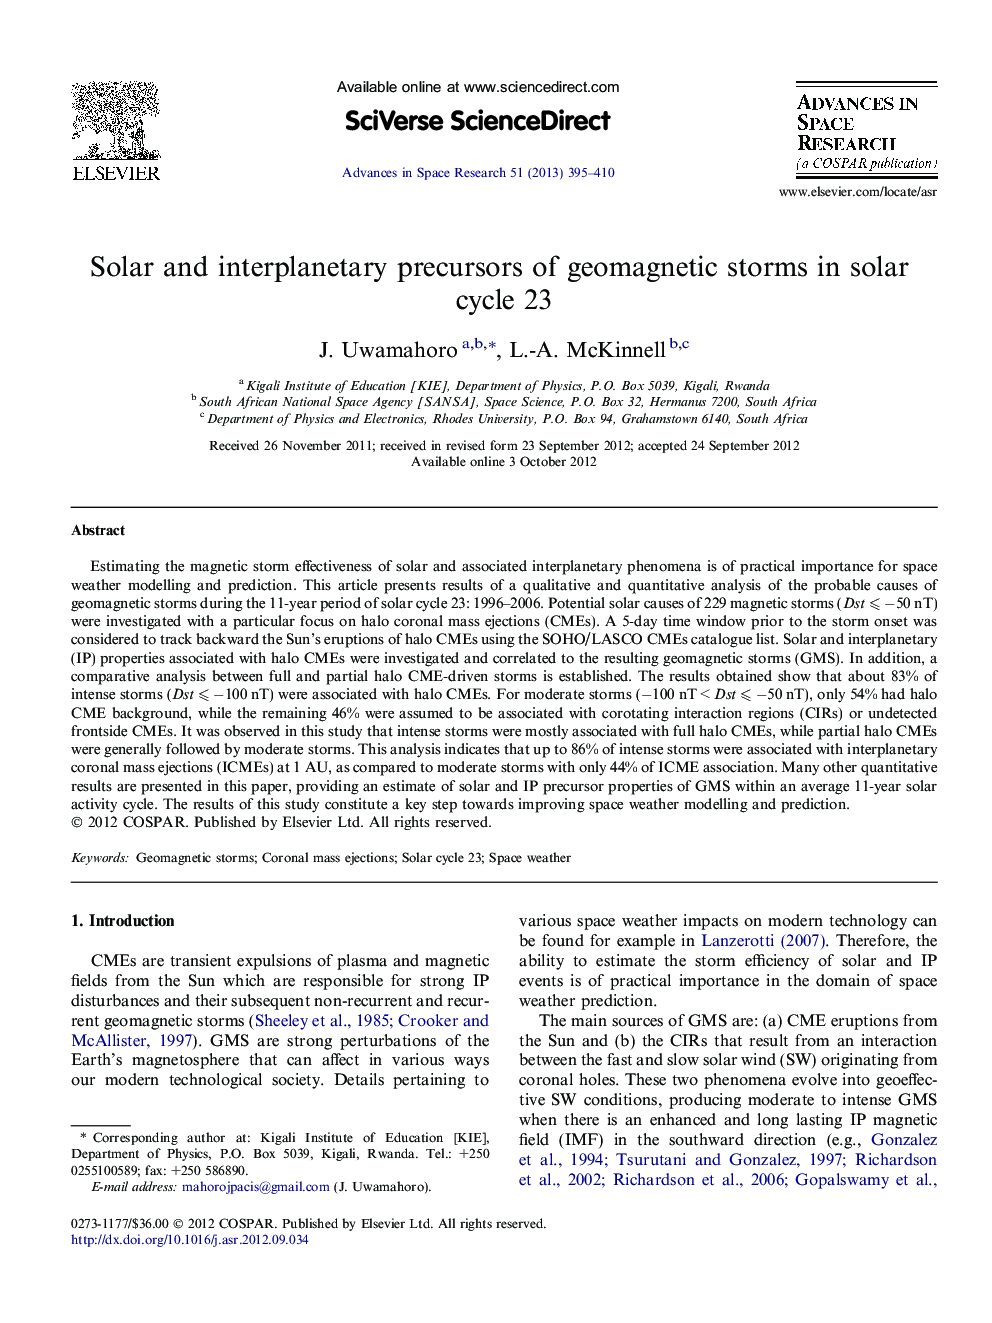 Solar and interplanetary precursors of geomagnetic storms in solar cycle 23